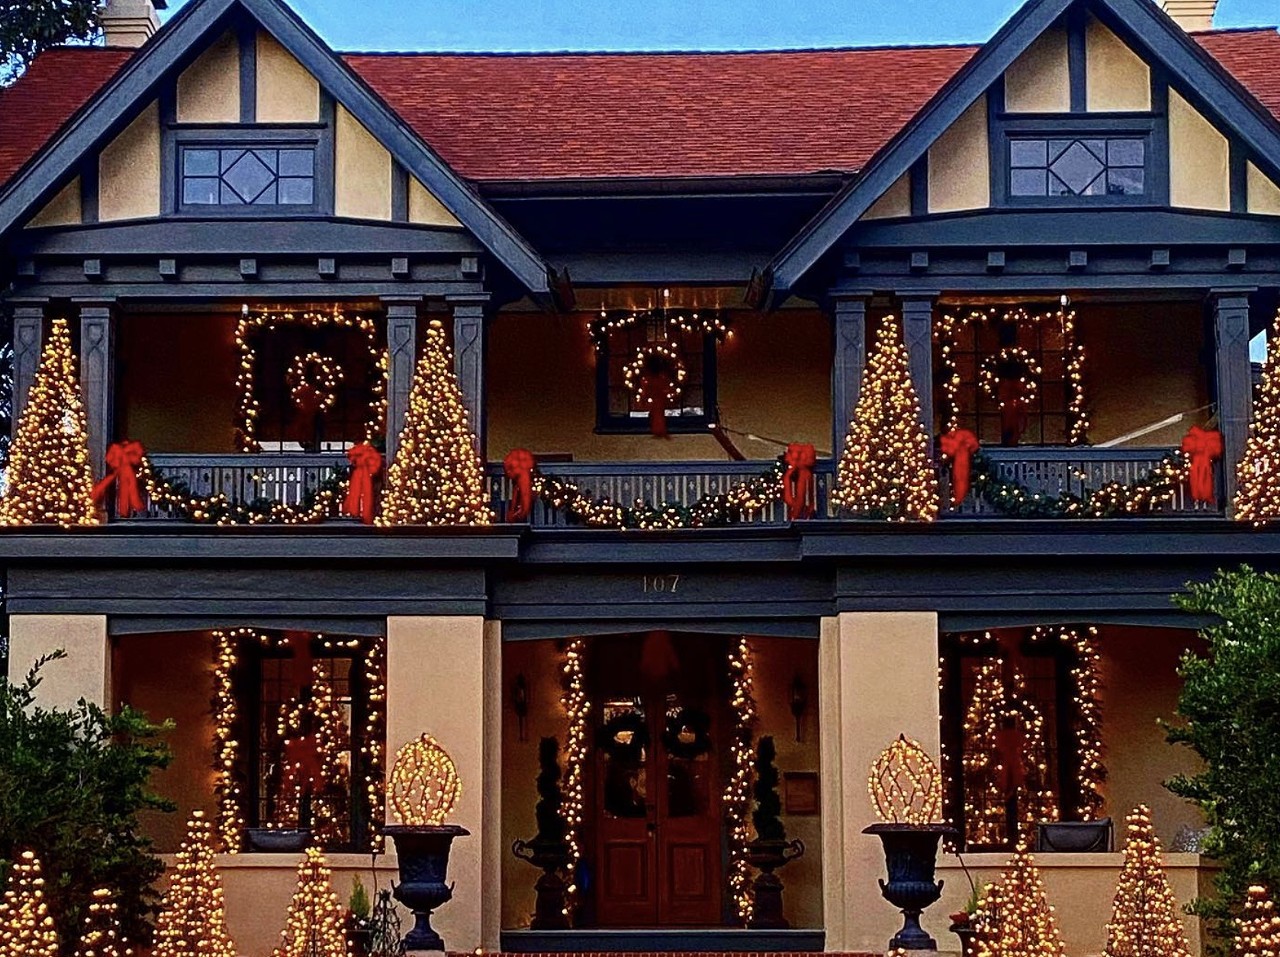 Monte Vista
Residents of Monte Vista tend to deck the halls in a major way. Though not an official display or event, Monte Vista makes for a prime spot for tricked-out displays. Take a drive through the neighborhood and admire these homes that fit the season just right.